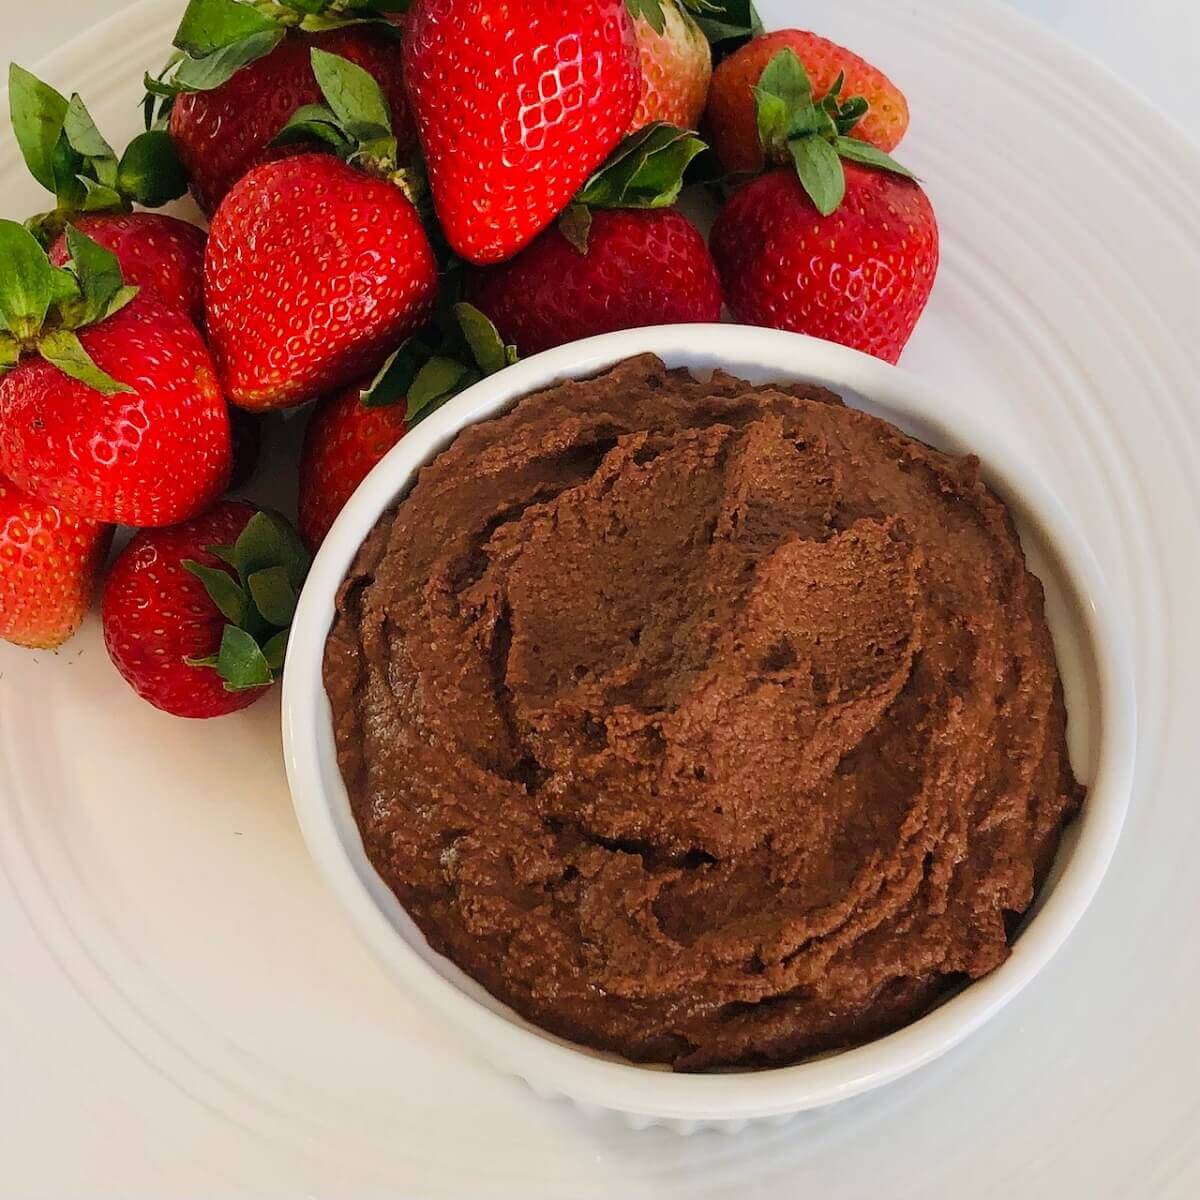 A bowl of dark chocolate hummus next to a pile of strawberries.